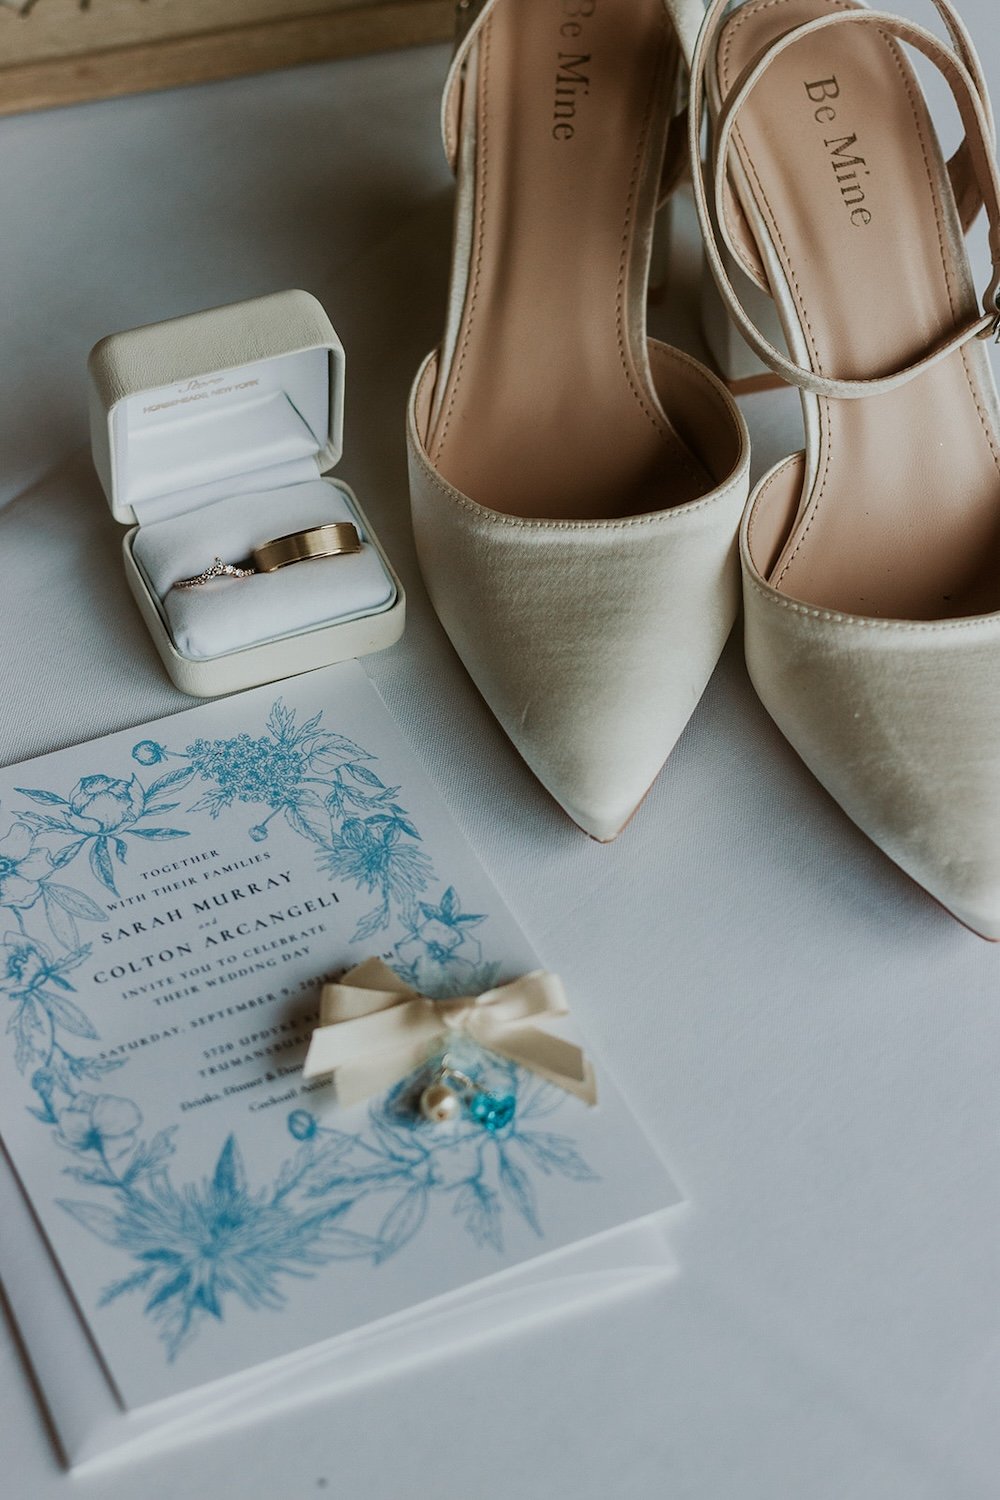 Detail photo of the brides closed toe champagne heels, their engagement rings and wedding stationary.